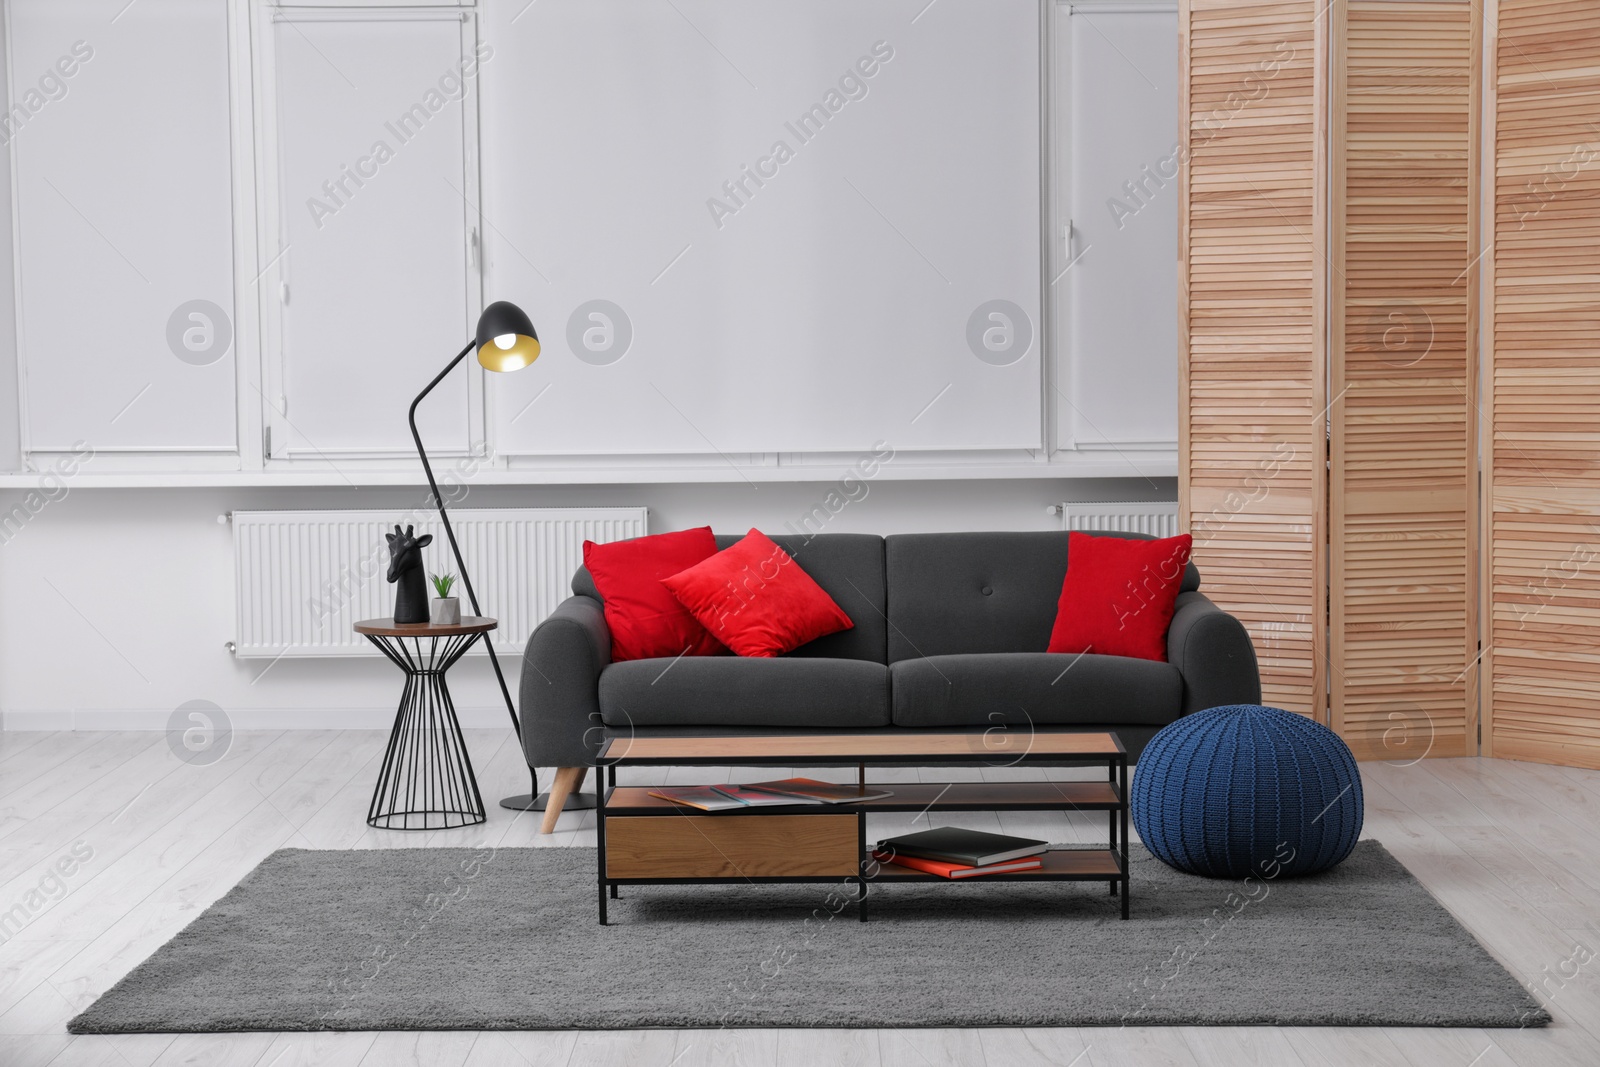 Photo of Comfortable furniture and floor lamp in stylish room. Interior design